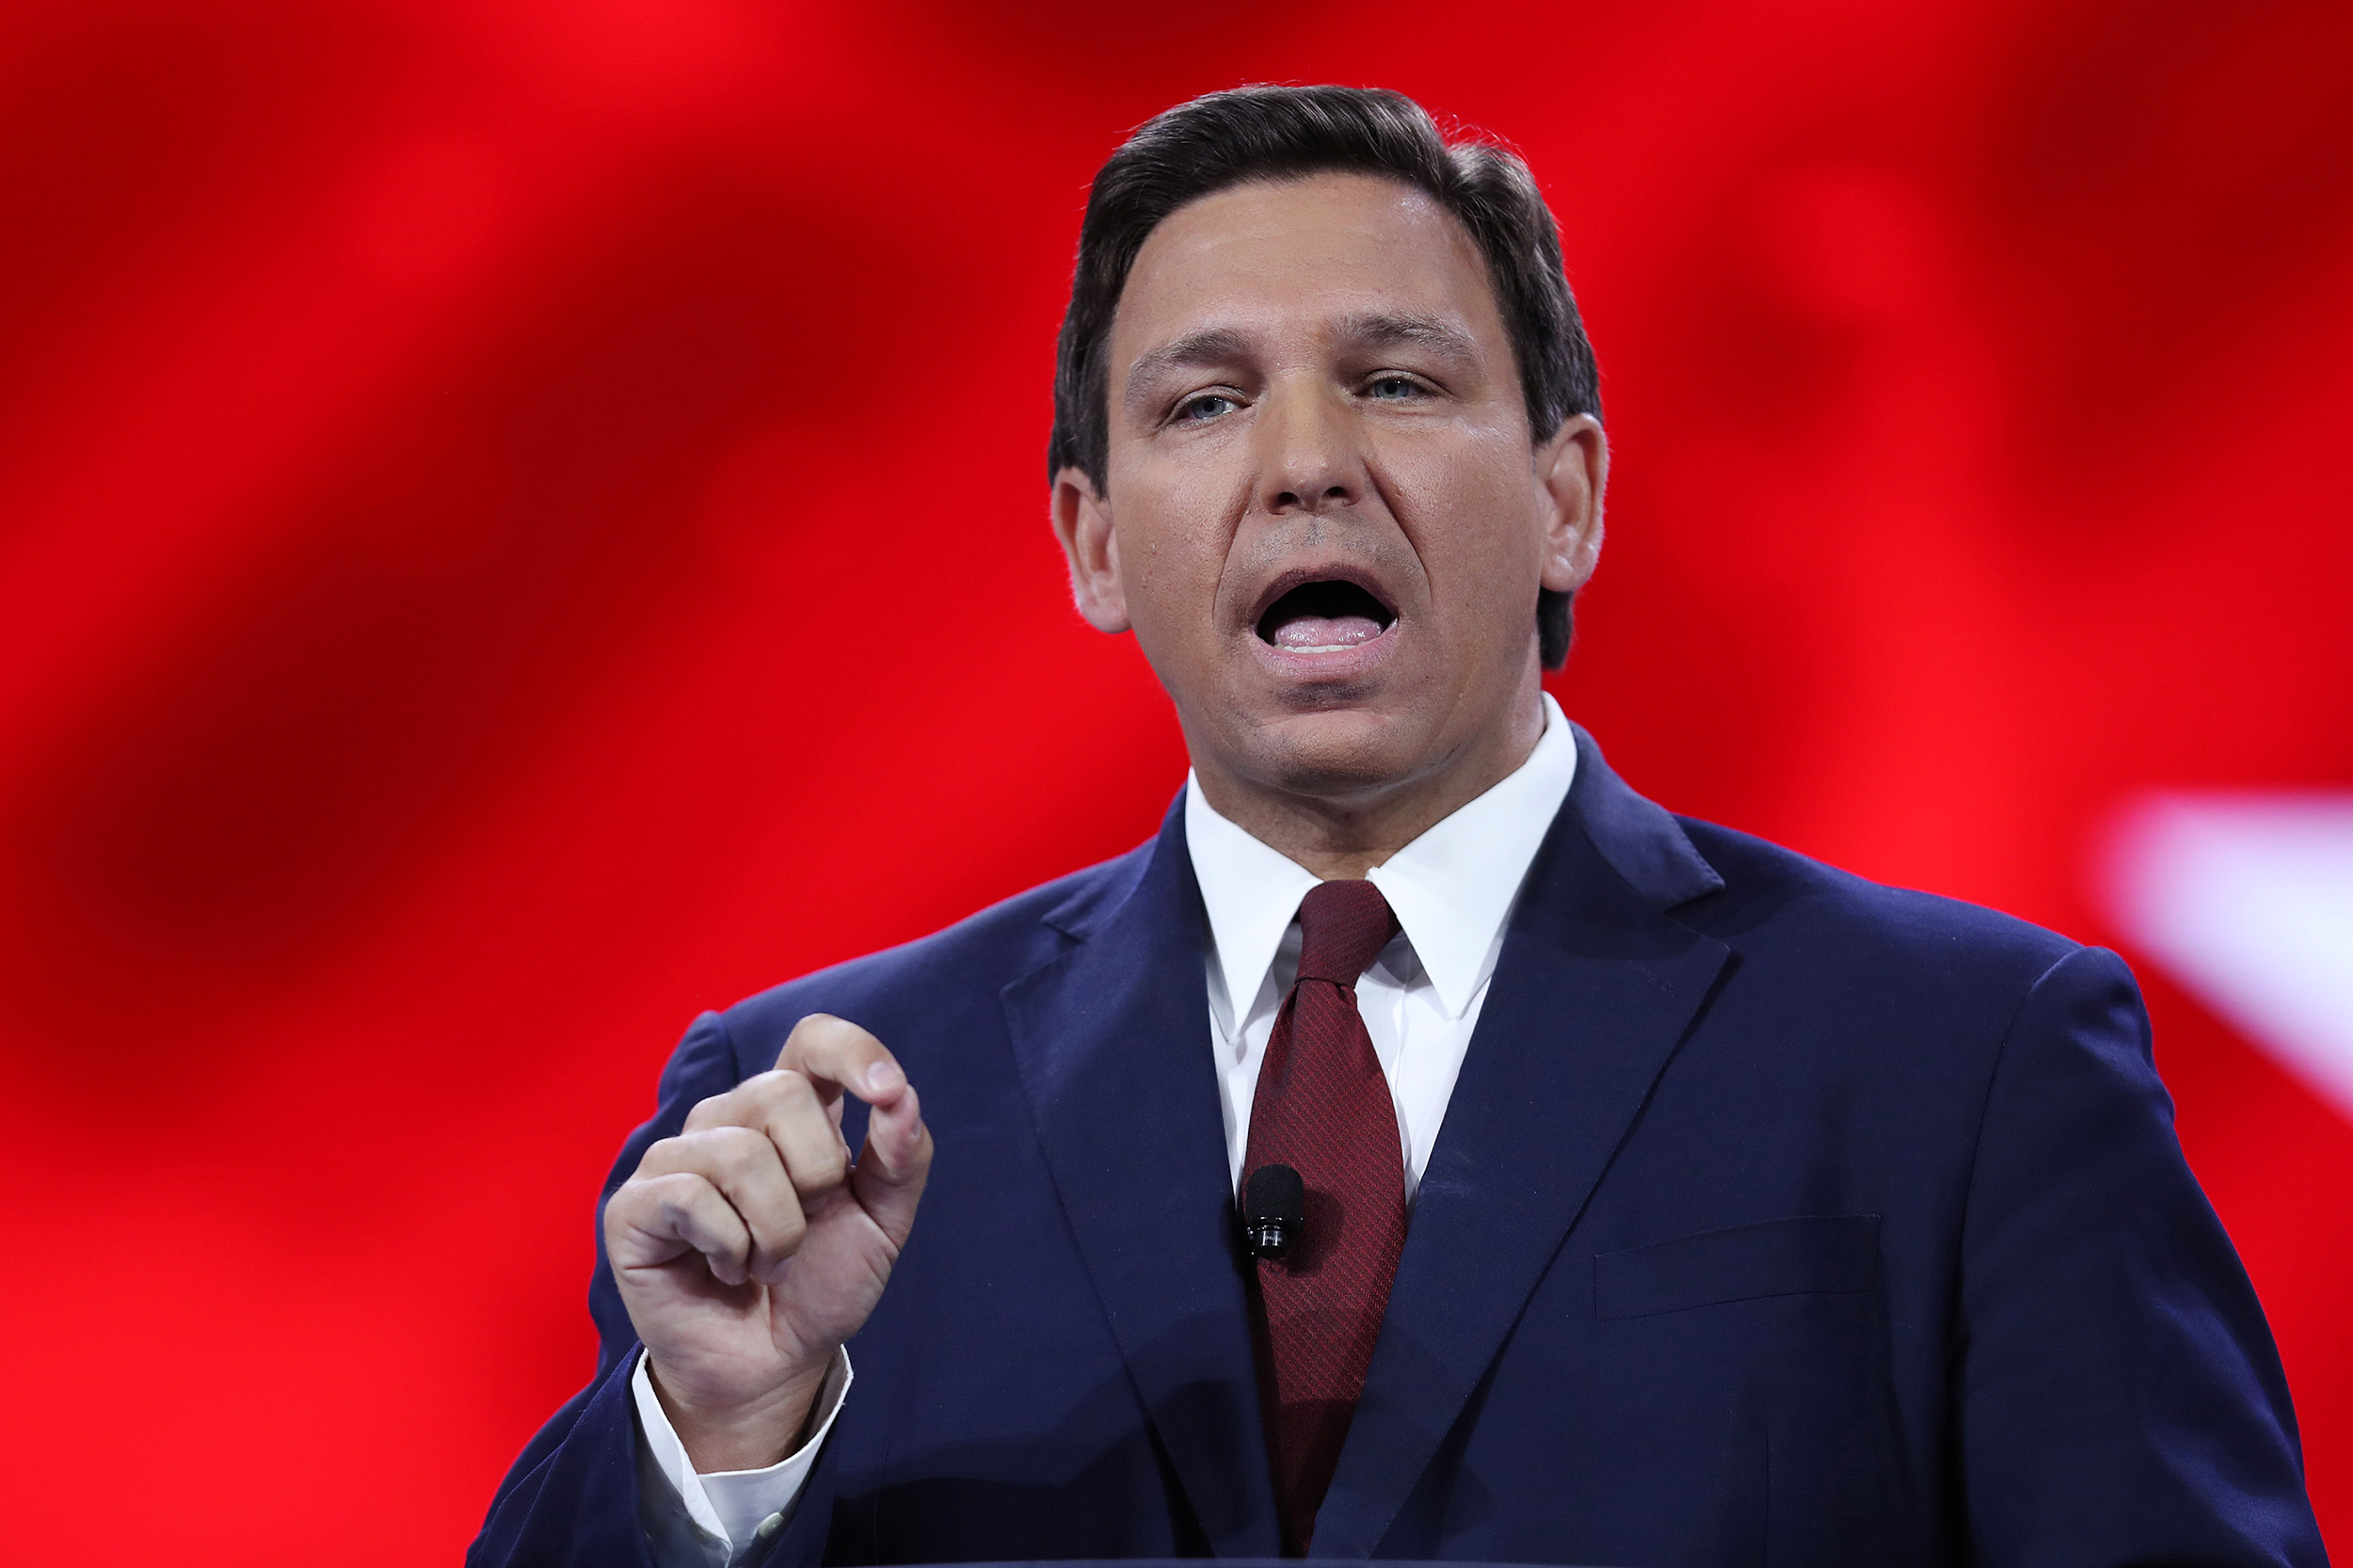 Florida Governor Ron DeSantis on Thursday signed into law a bill that imposes severe restrictions on abortion after 15-weeks of pregnancy, replacing the earlier 24-week mark.